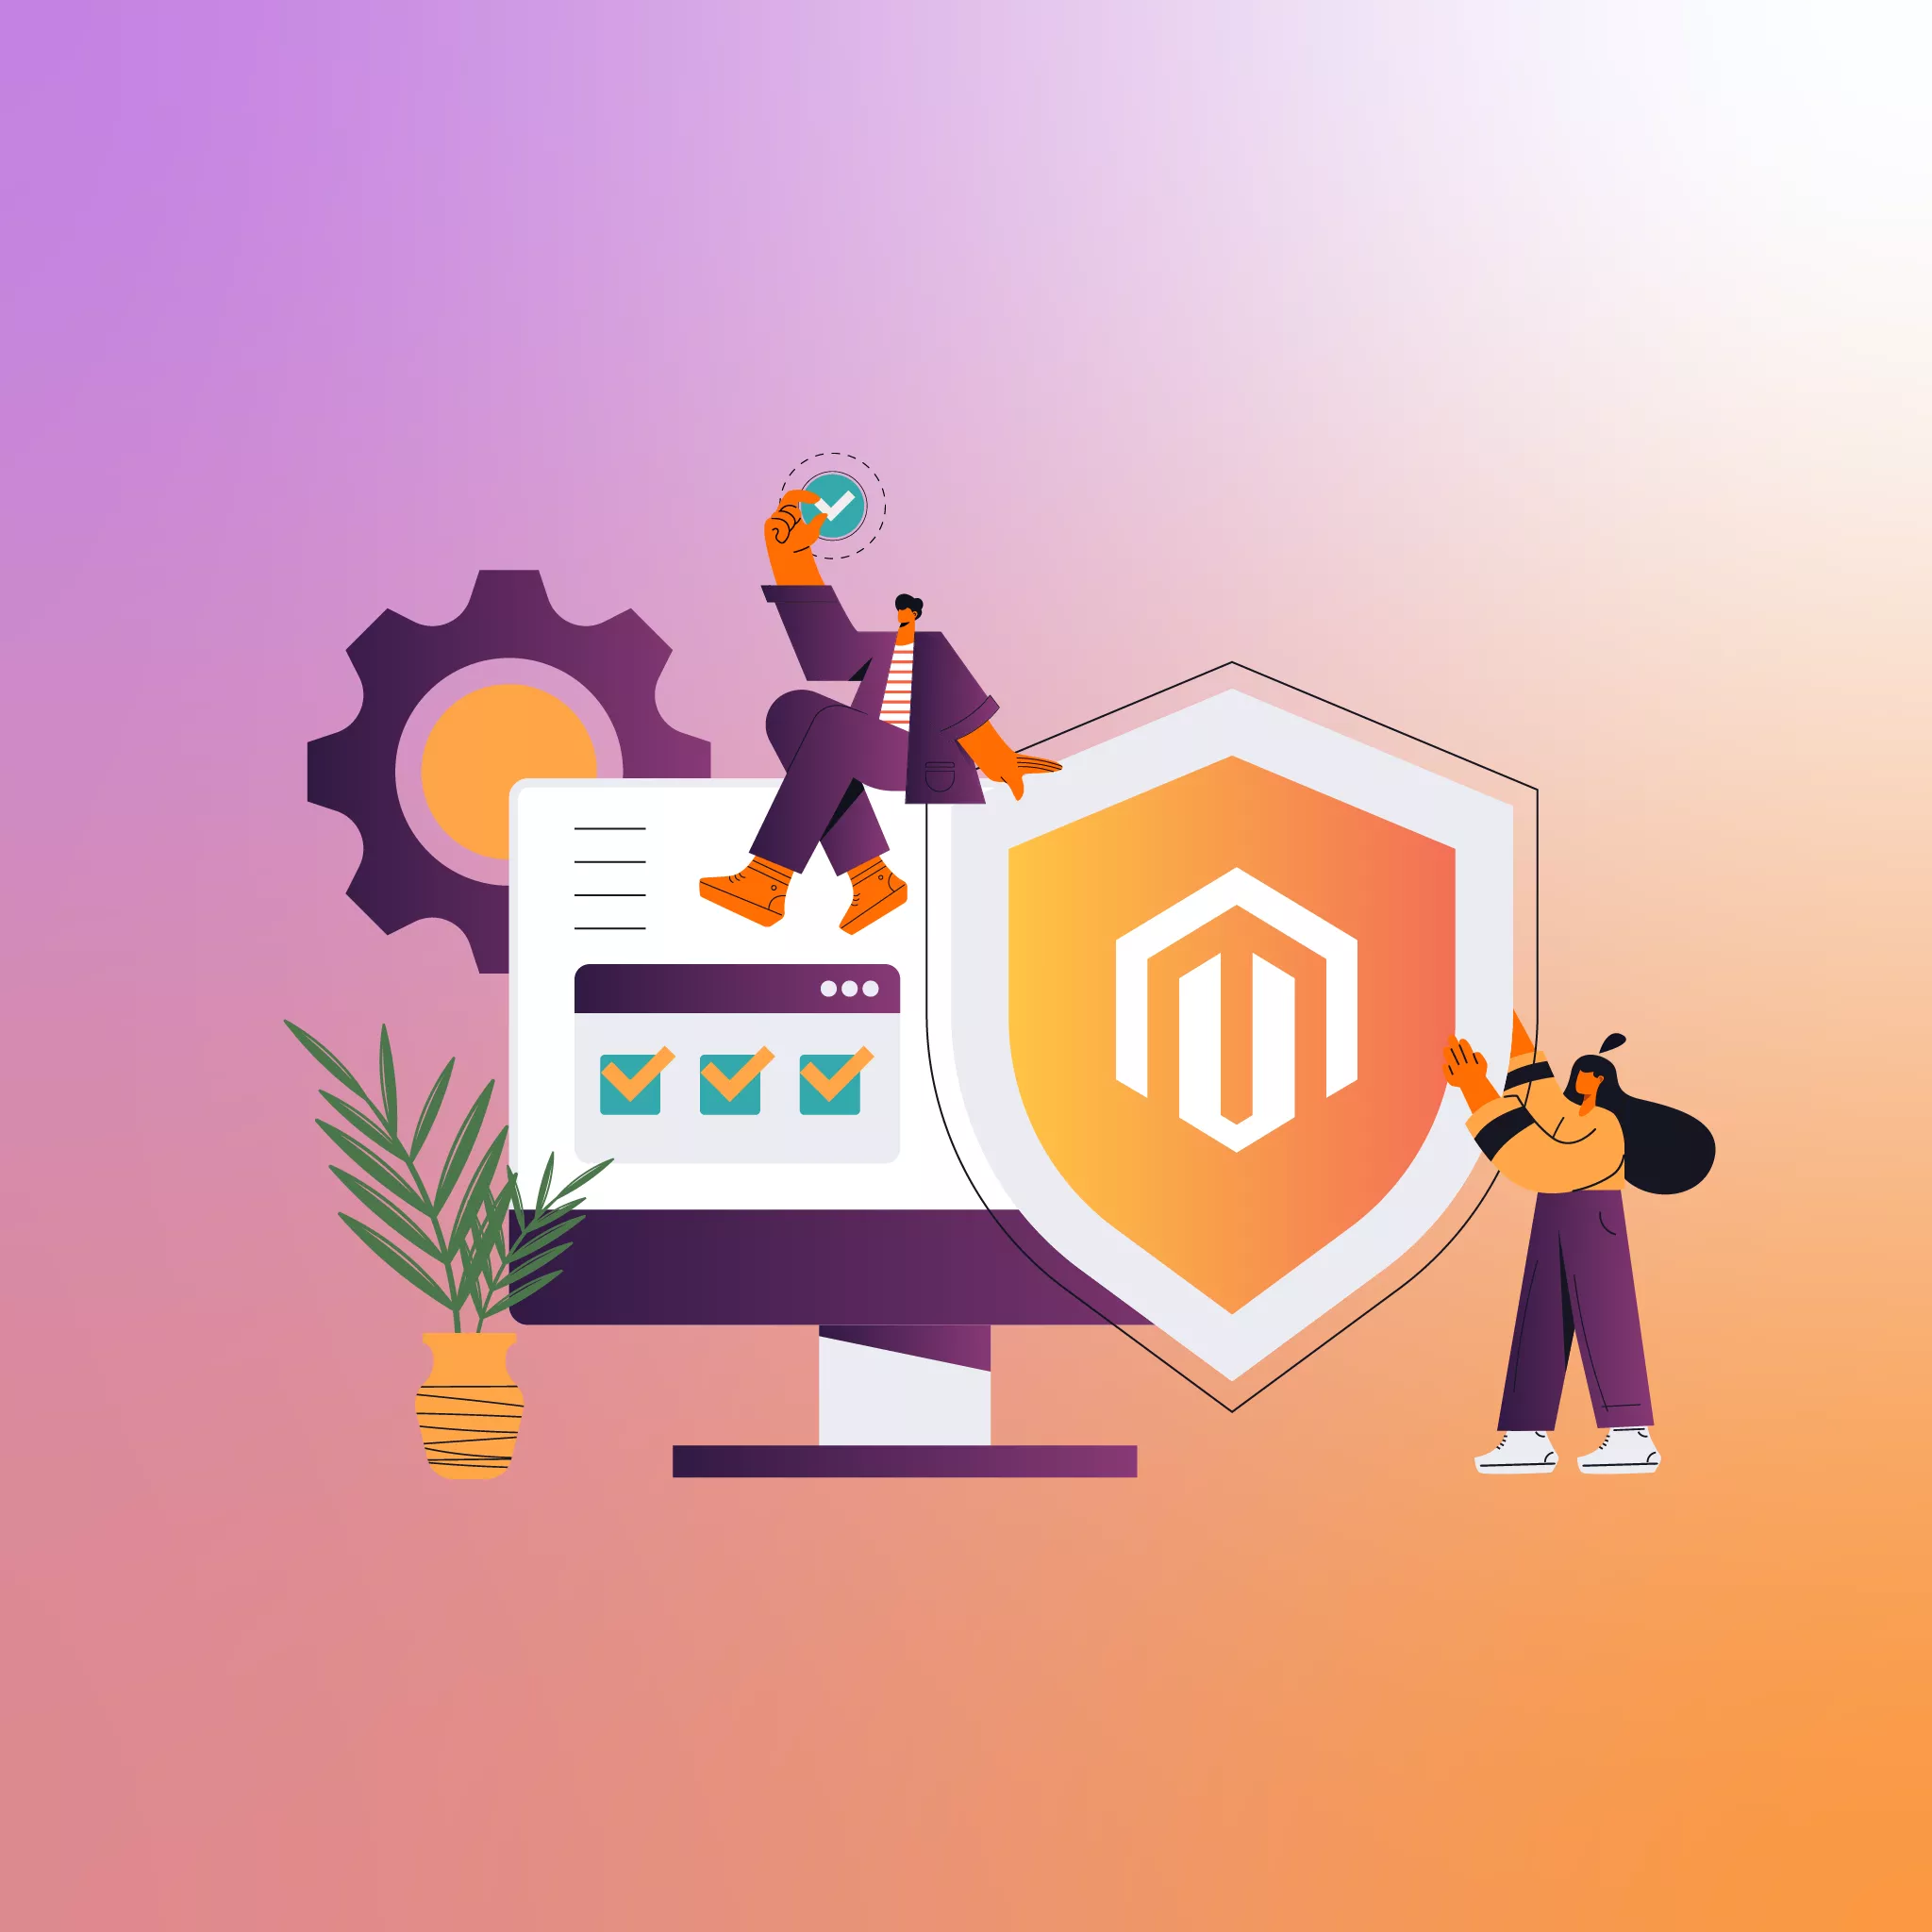 How to Fix Magento 2 Search Not Working Properly? 100% Working Tips –  Mageplaza